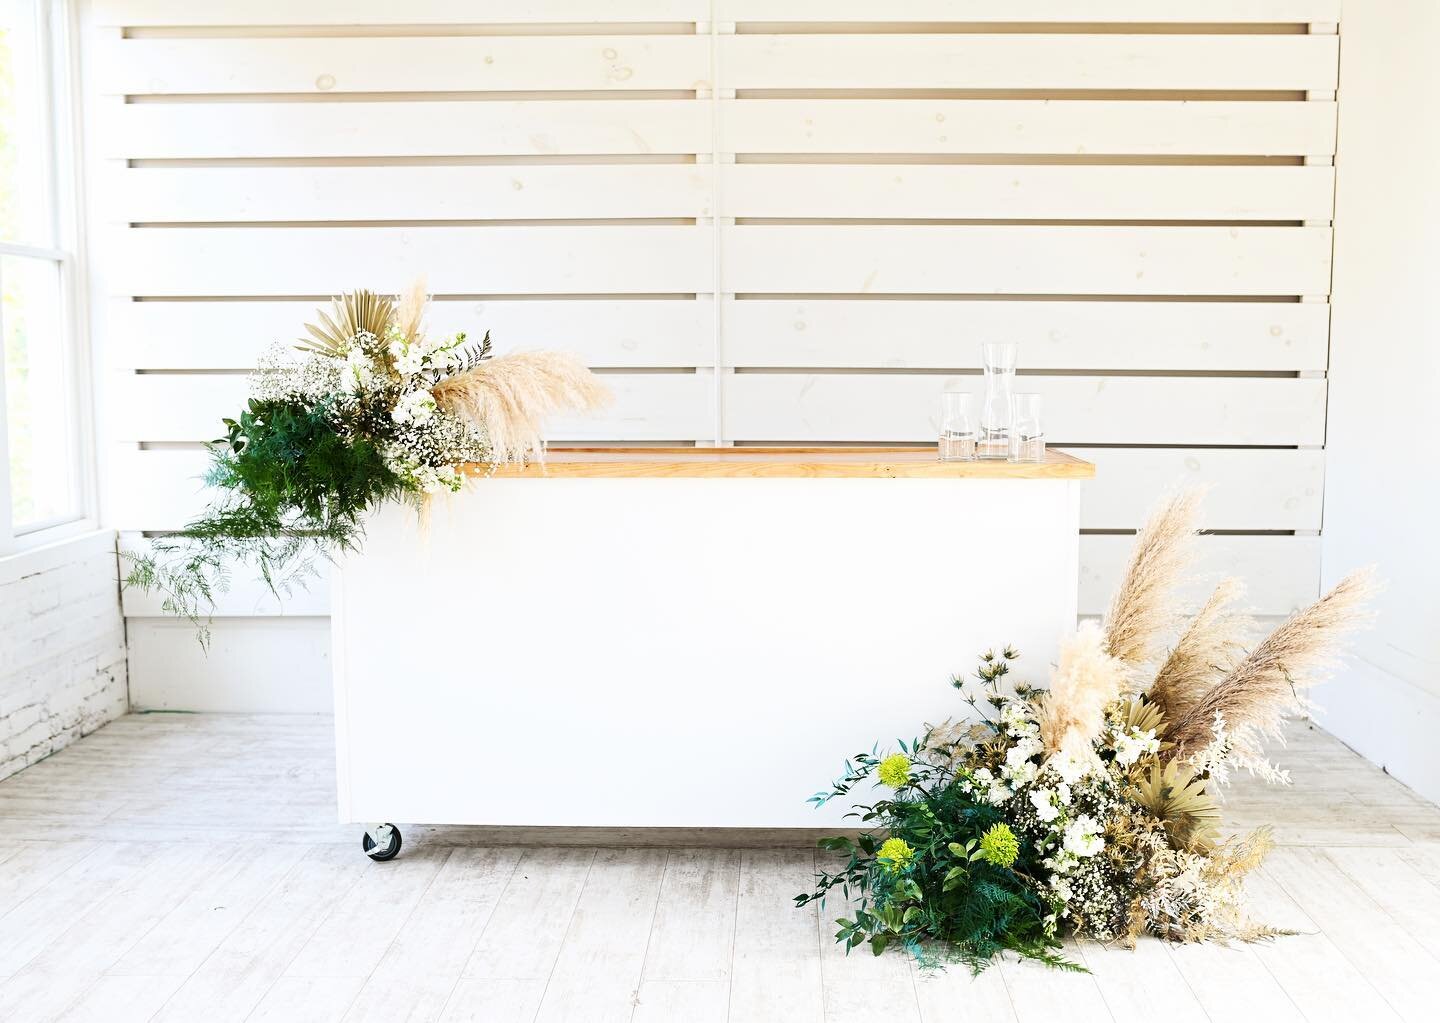 Top shelf styling. Make your bar a focal point 🌾